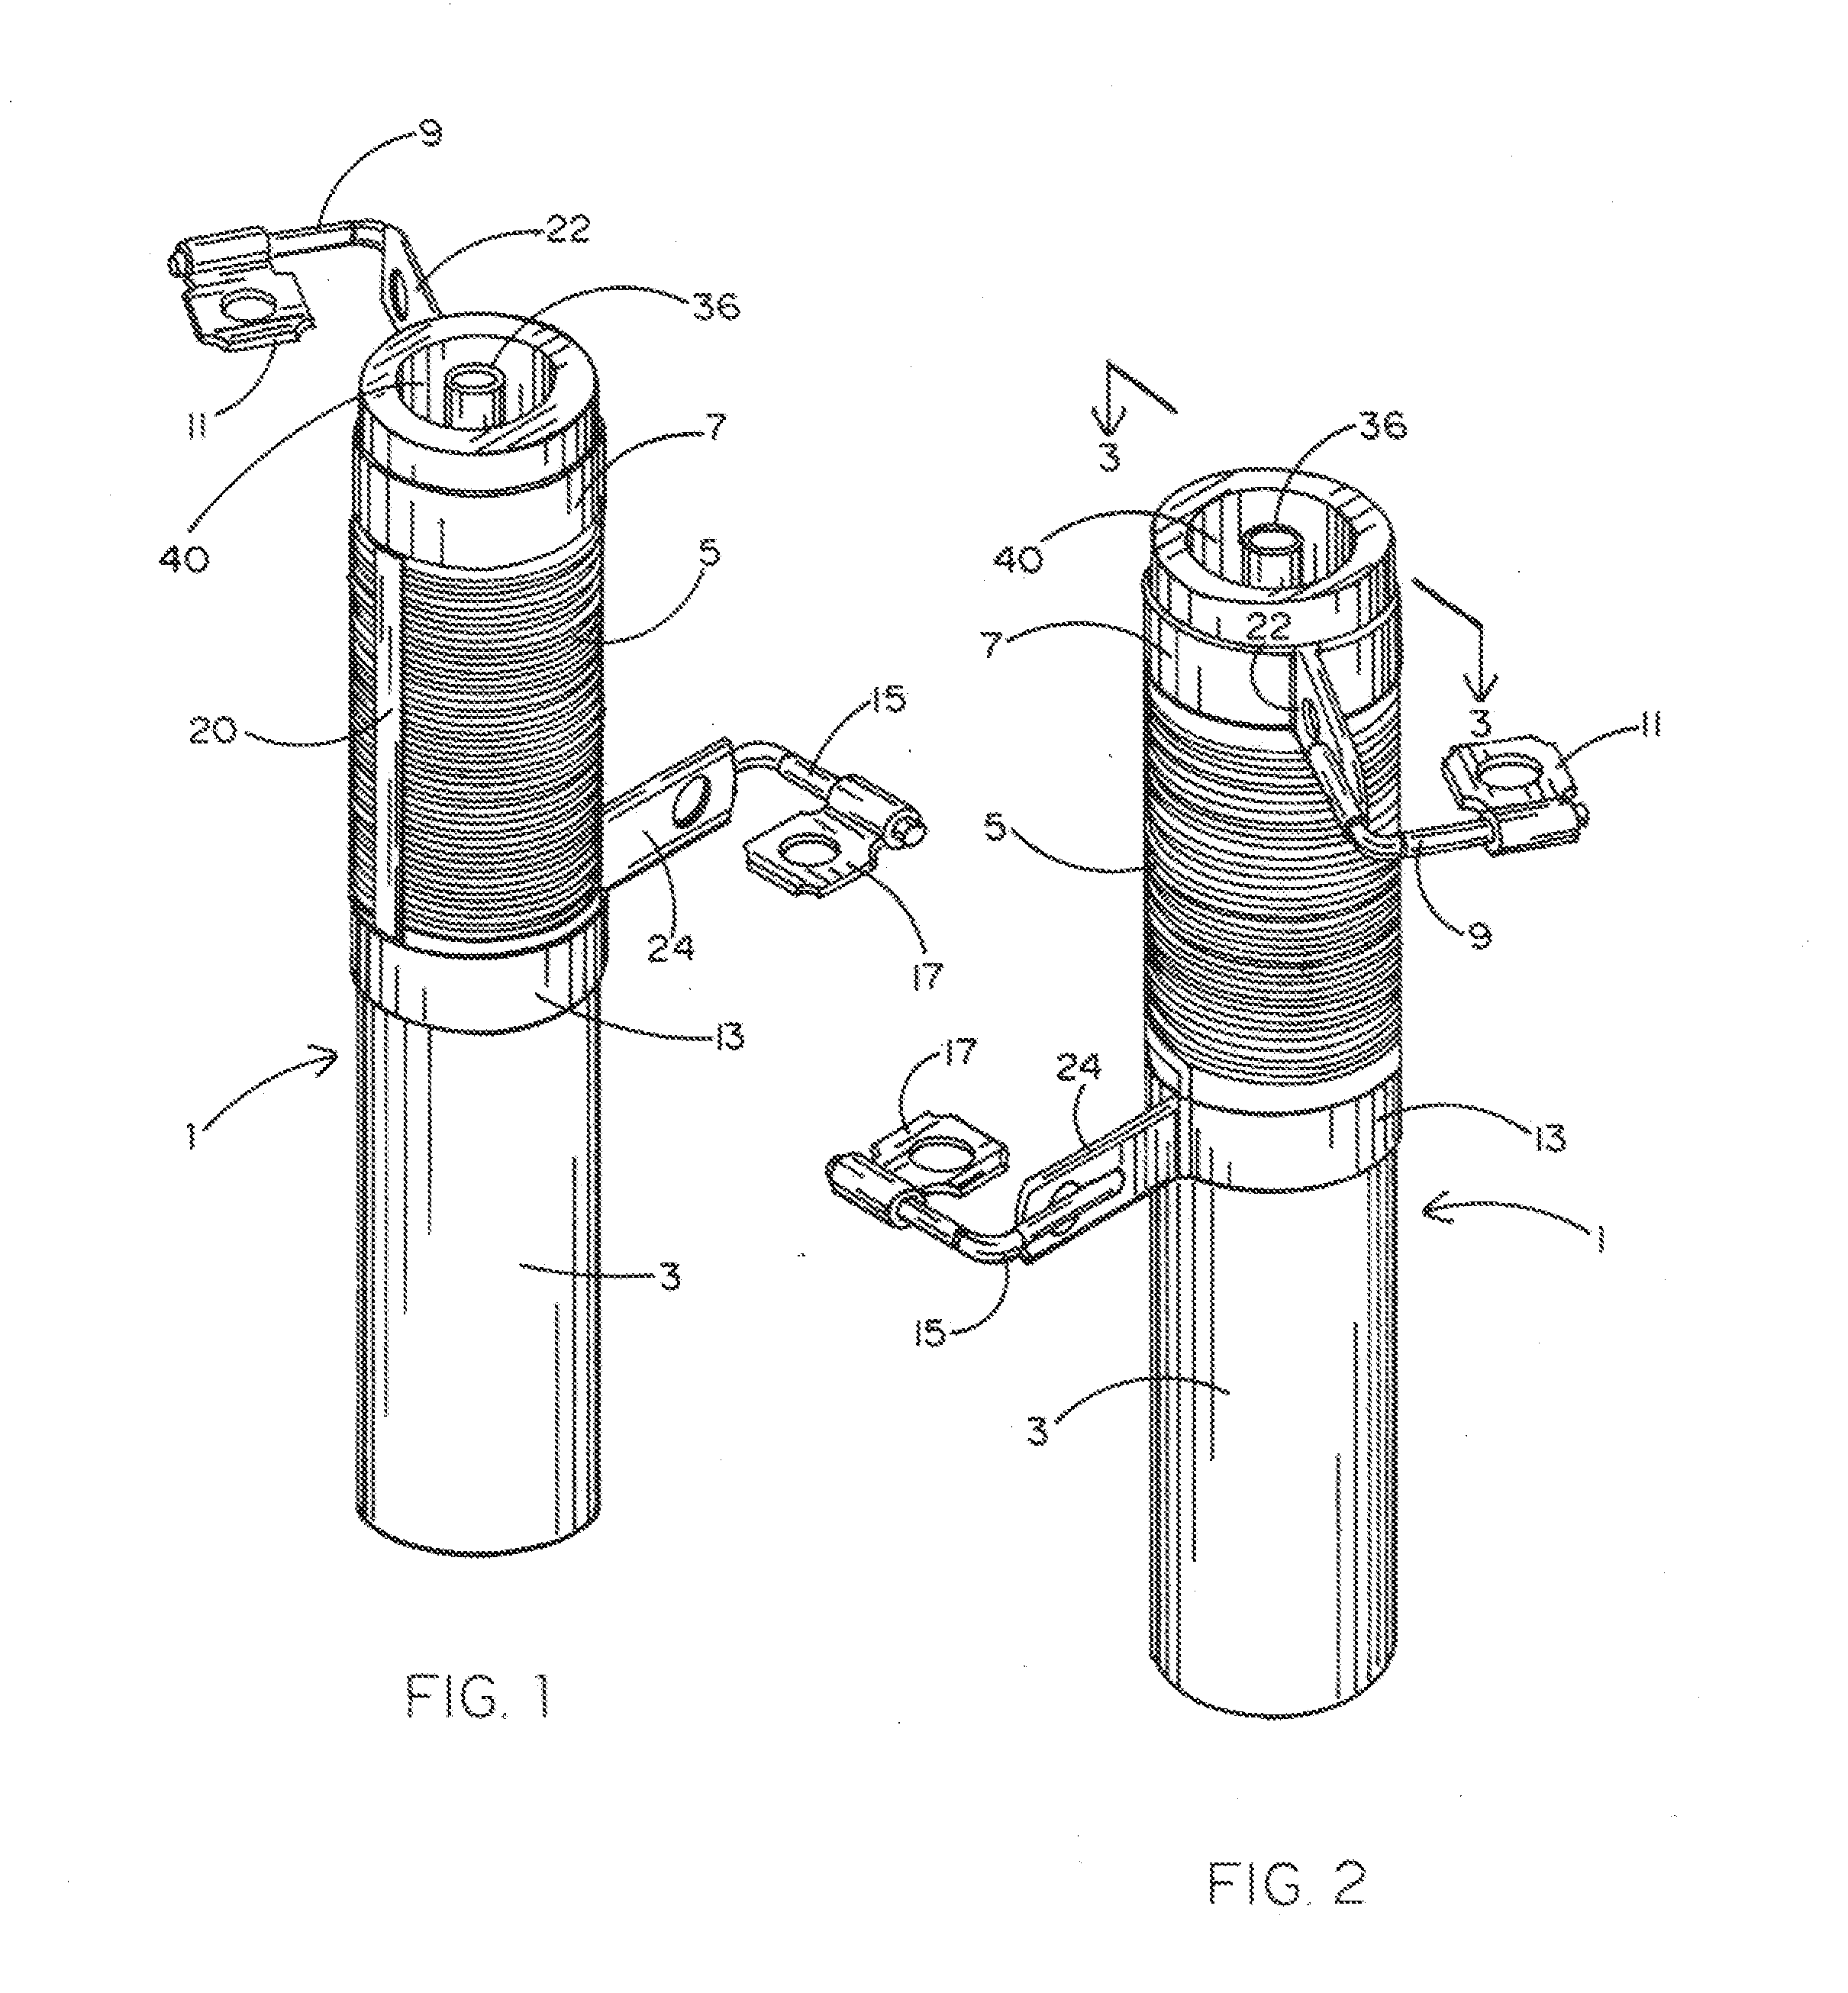 Oil transporting vaporizer for a smoke generating apparatus to detect leaks in a fluid system